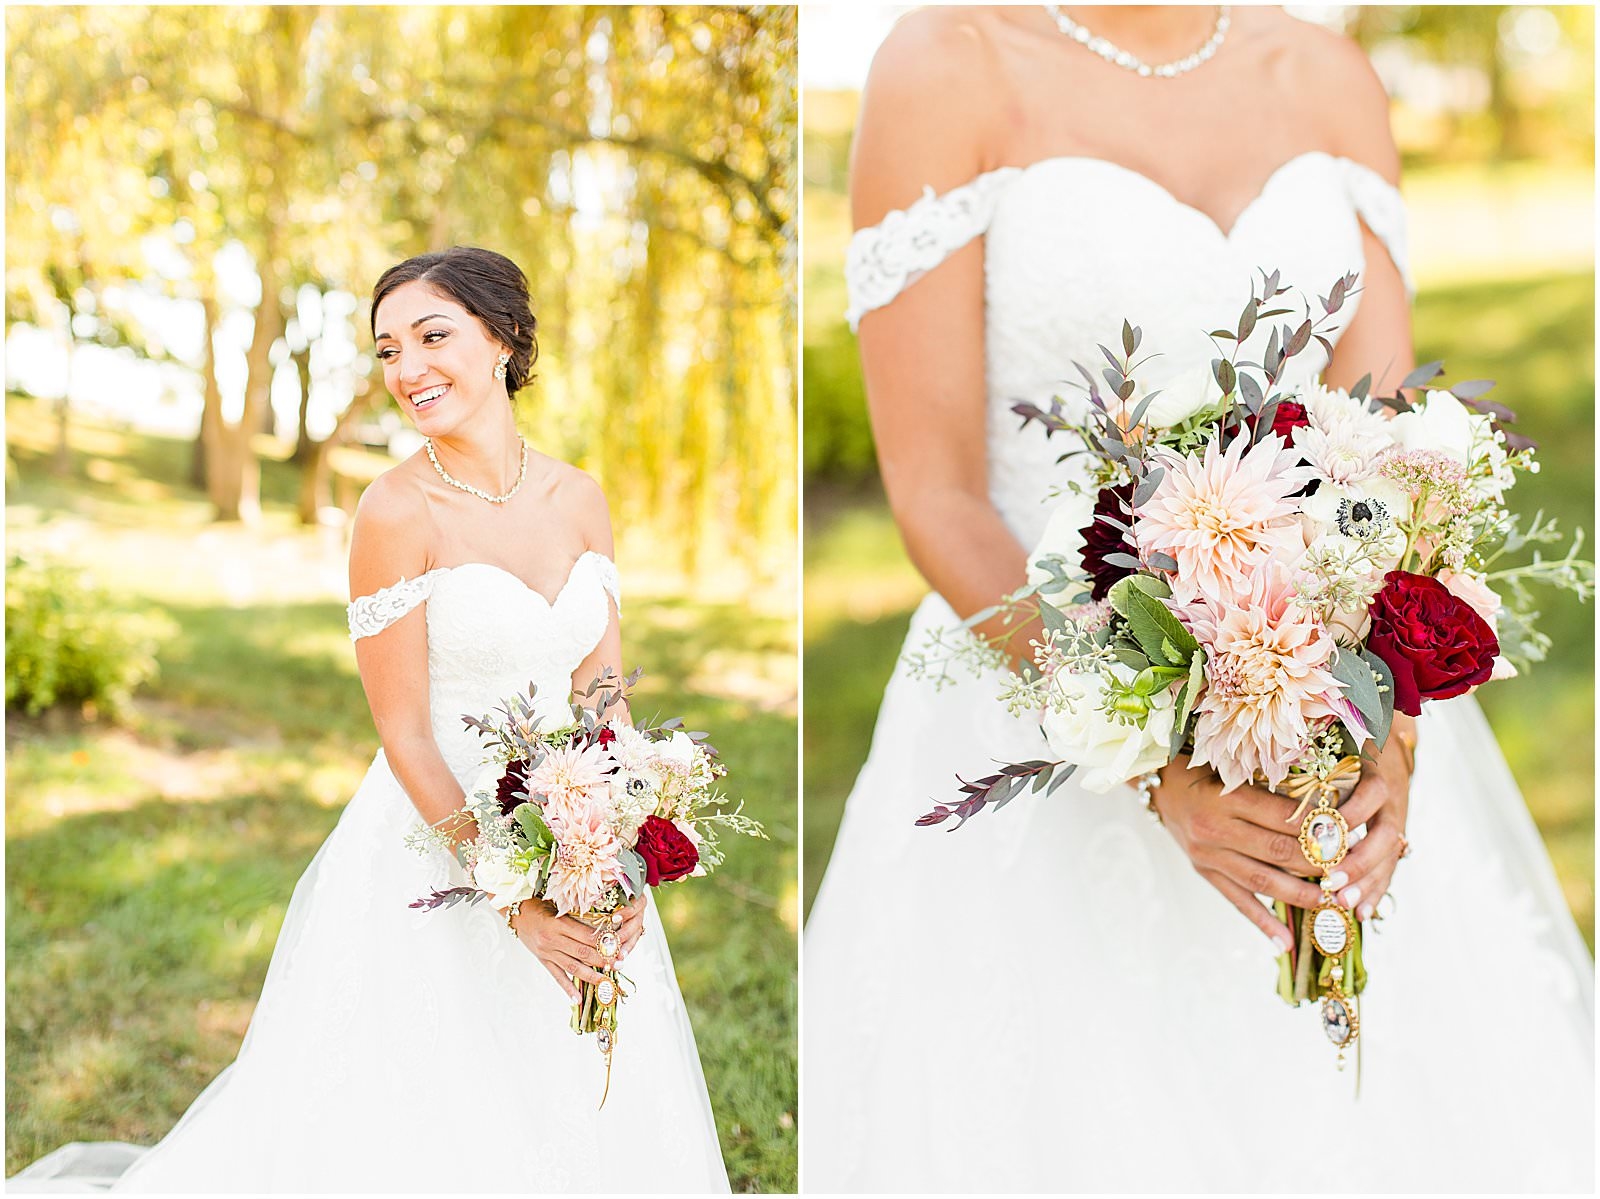 A Stunning Fall Wedding in Indianapolis, IN |. Sally and Andrew | Bret and Brandie Photography 0088.jpg